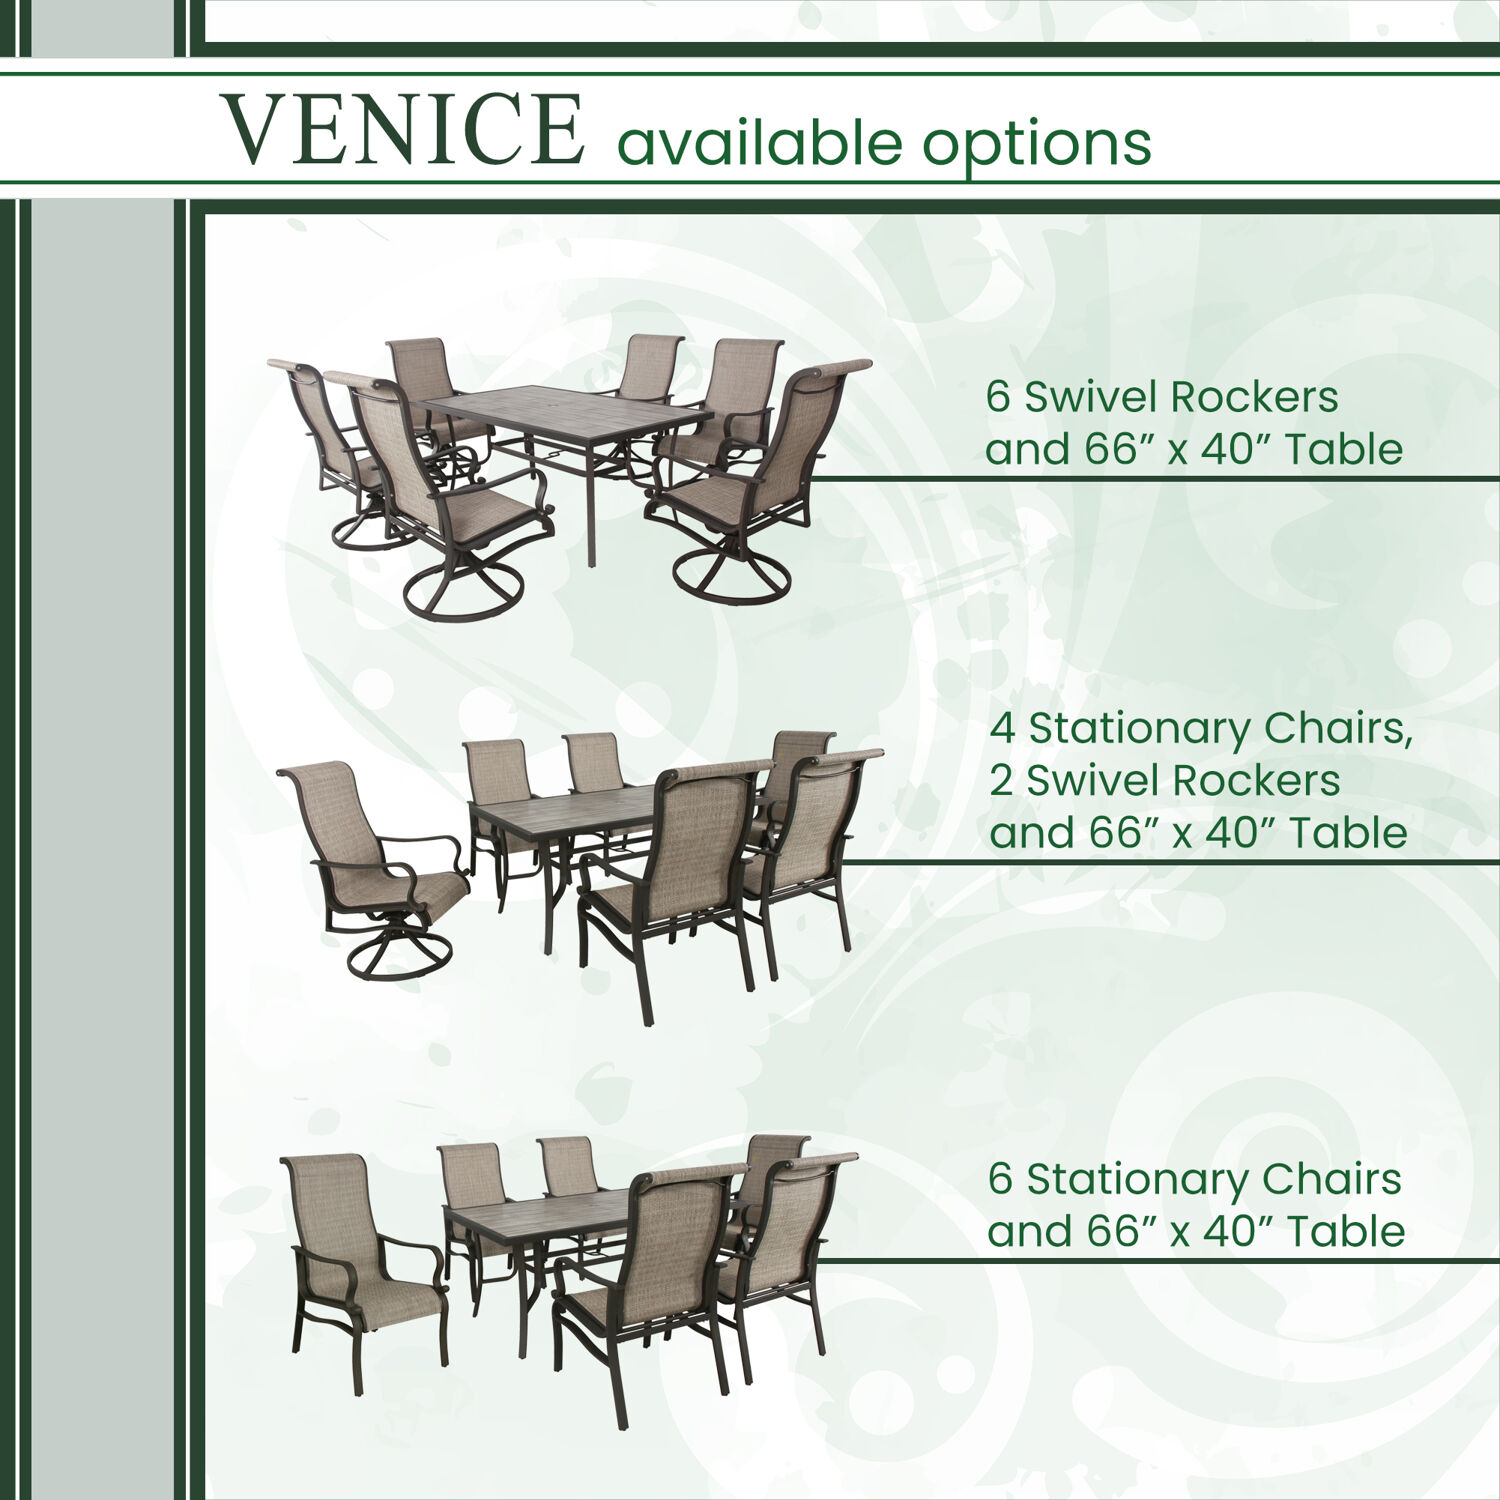 Hanover Venice 7-Piece Dining Set with 2 Sling Swivel Rocker Chairs, 4 Sling Stationary Chairs and 66 in. x 40 in. Slat Top Table - image 4 of 12